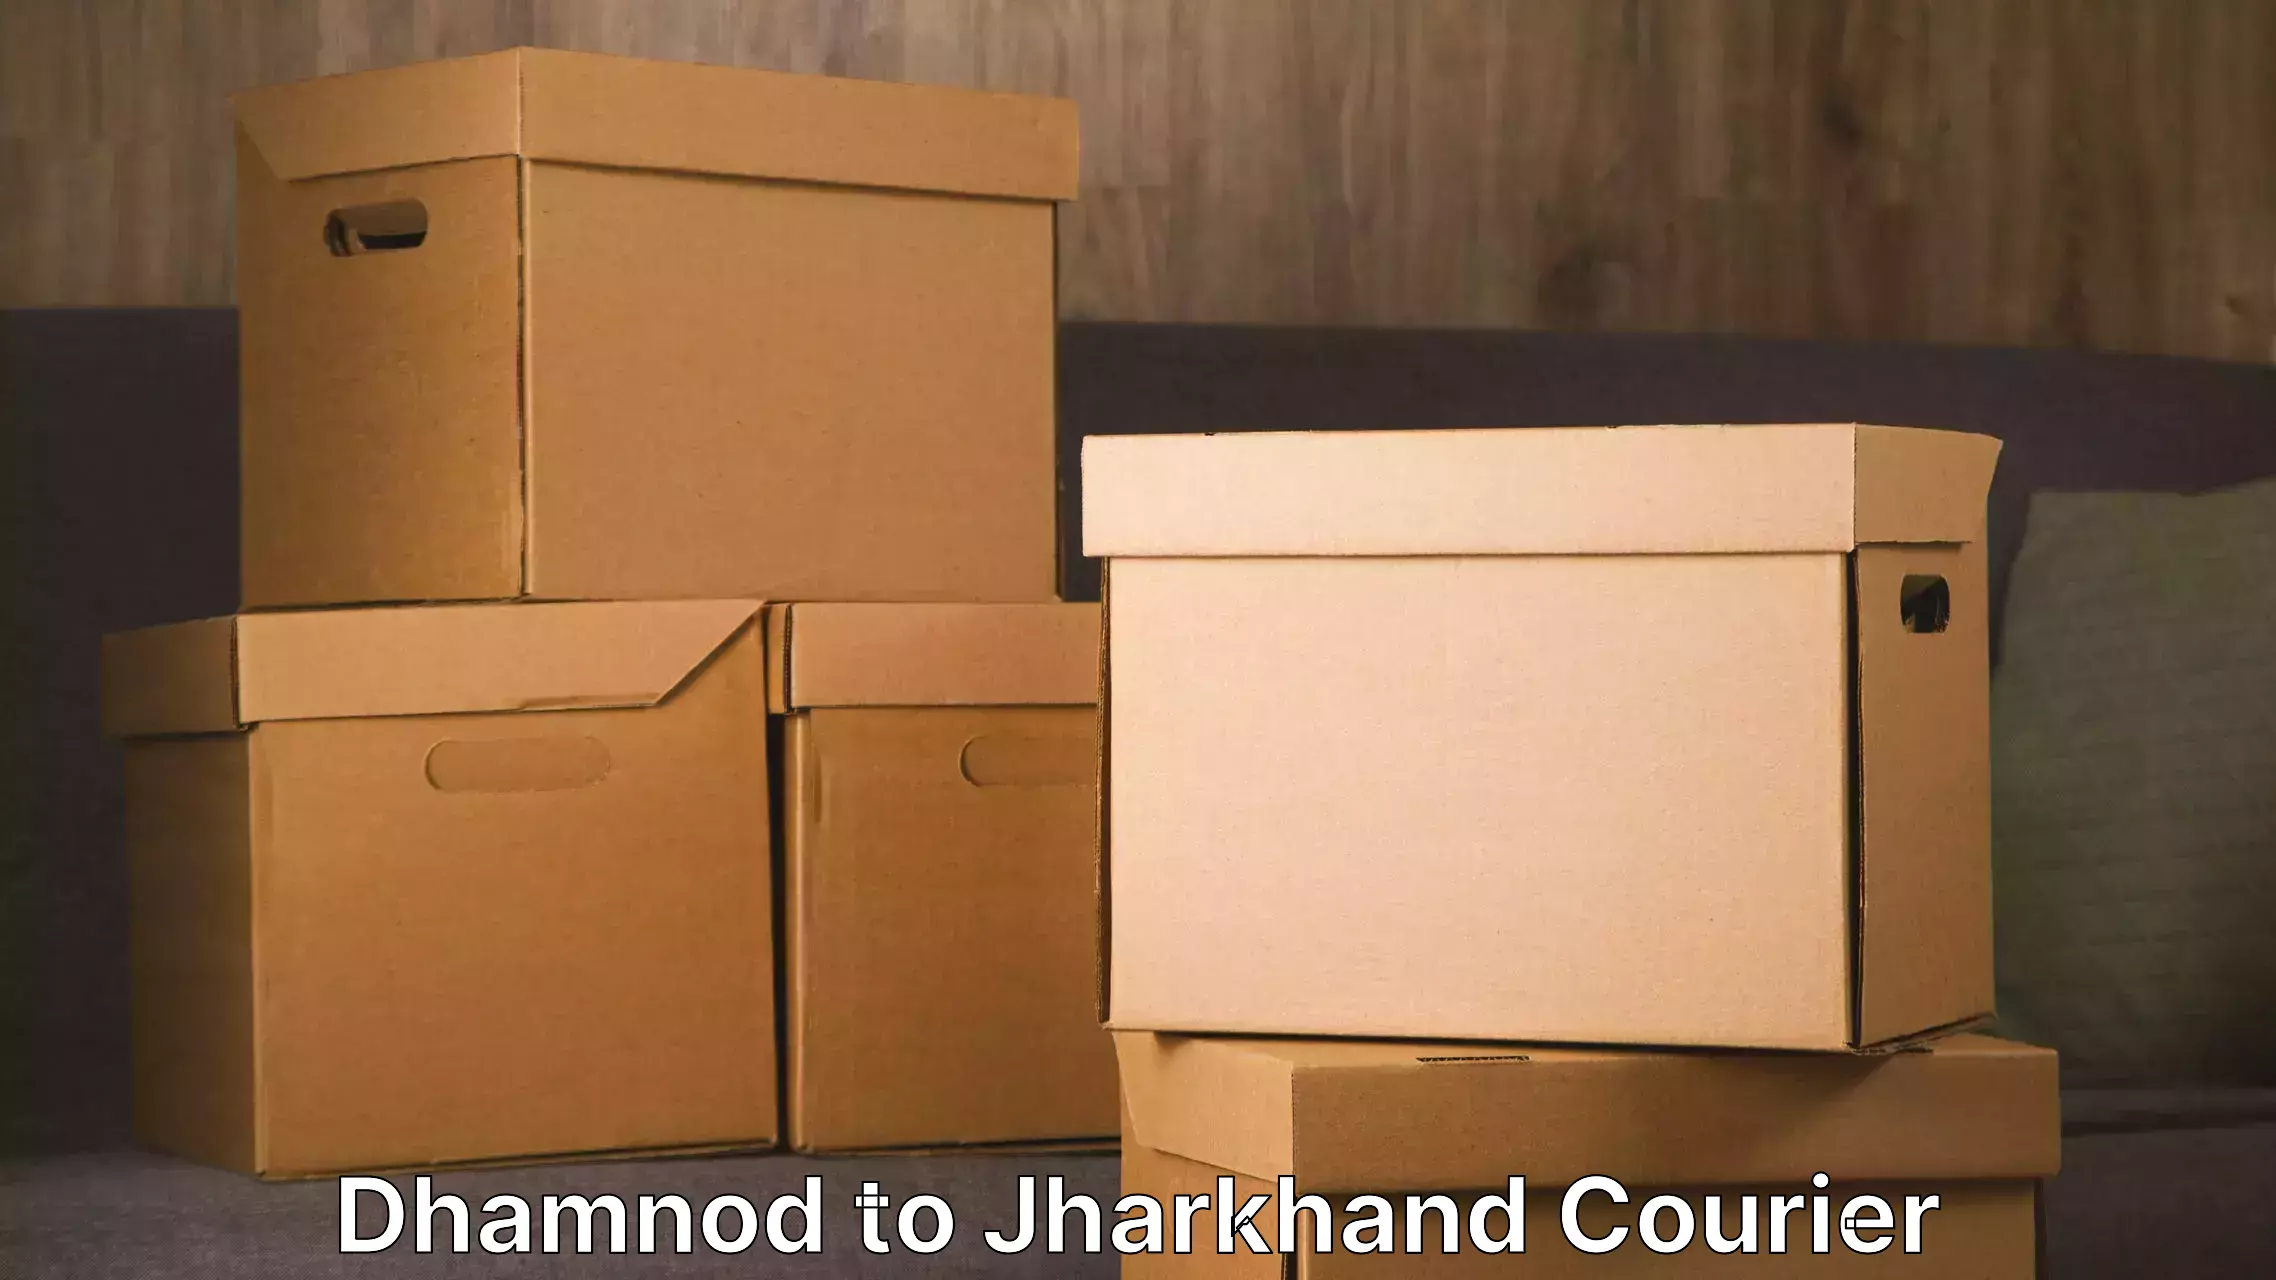 Furniture moving specialists Dhamnod to Jharkhand